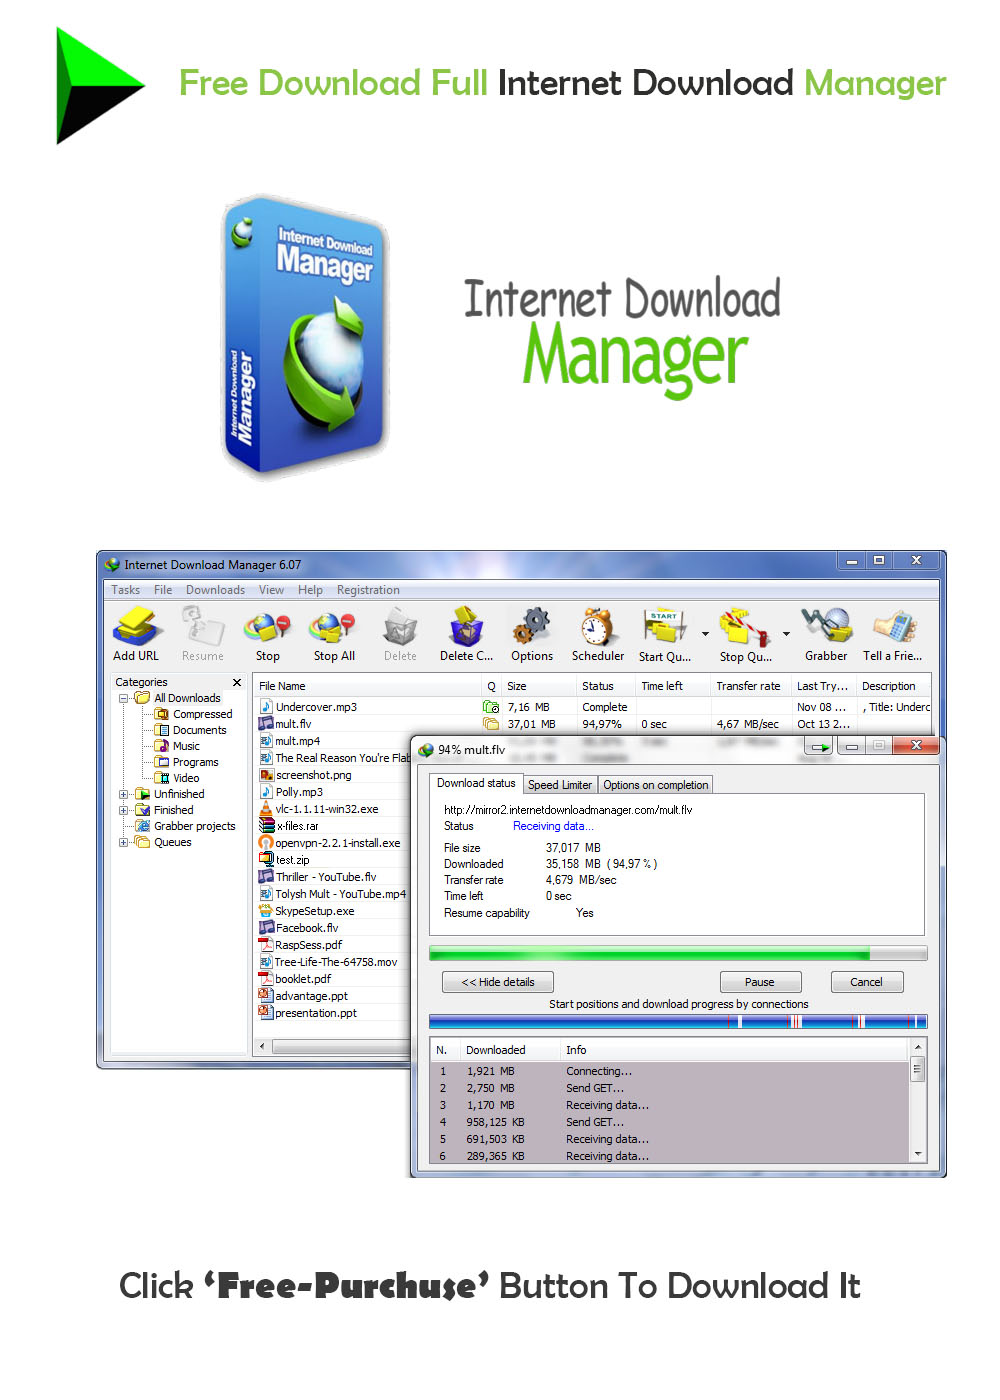 internet download manager free download full version with crack free